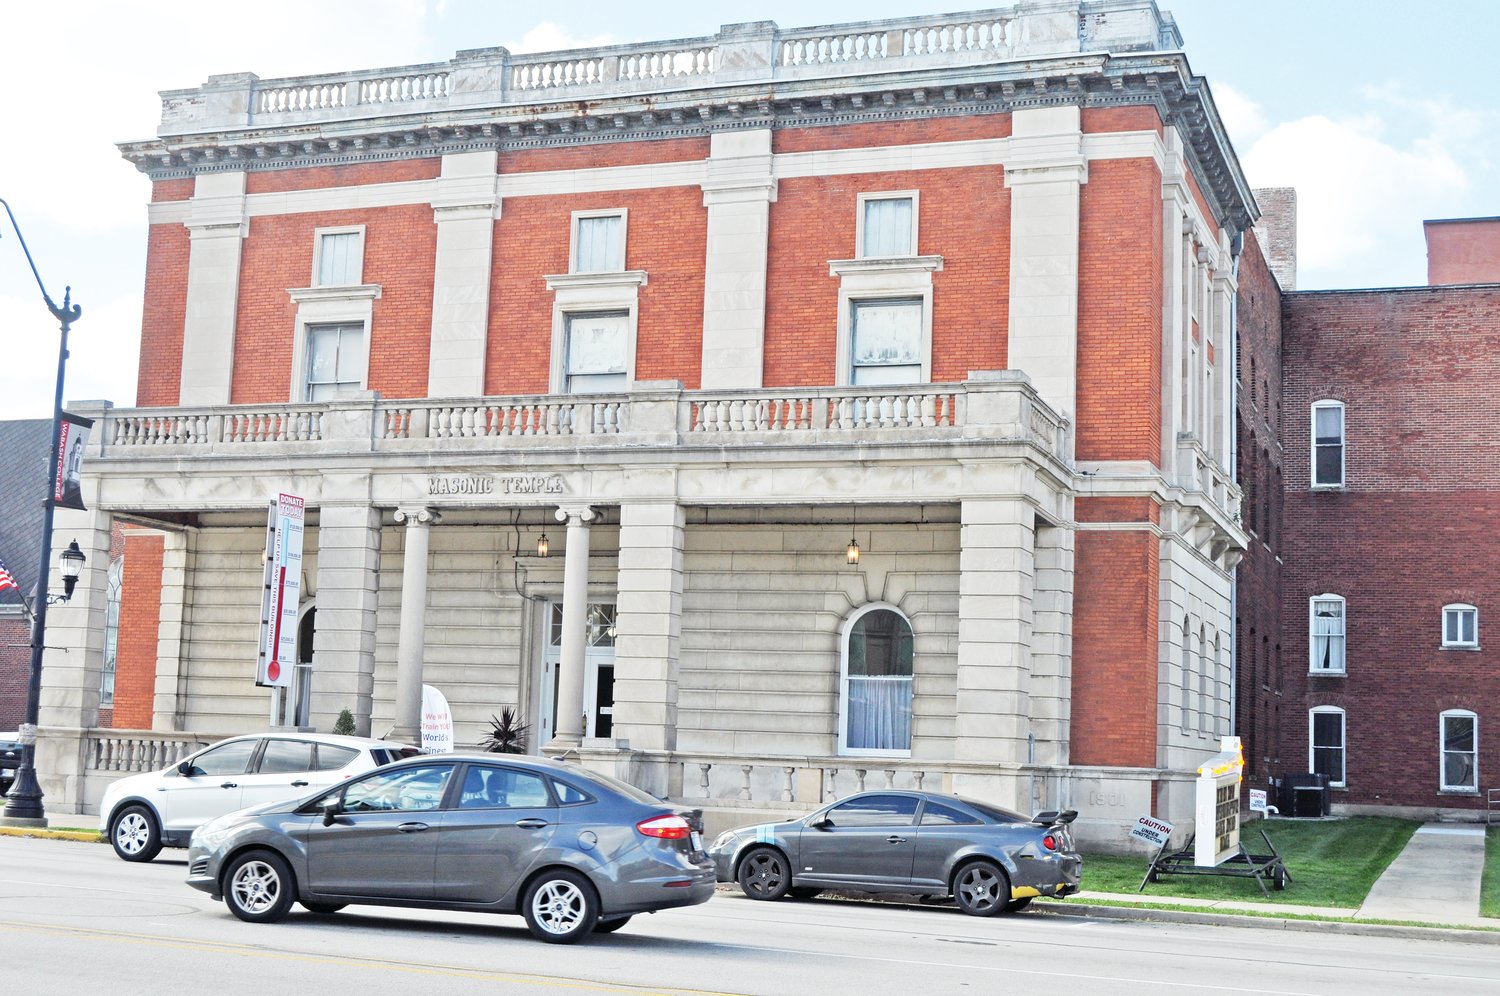 Cars drive past the Masonic Cornerstone Grand Hall and Event Center on Tuesday. The building is nearing historic district status from the City of Crawfordsville.